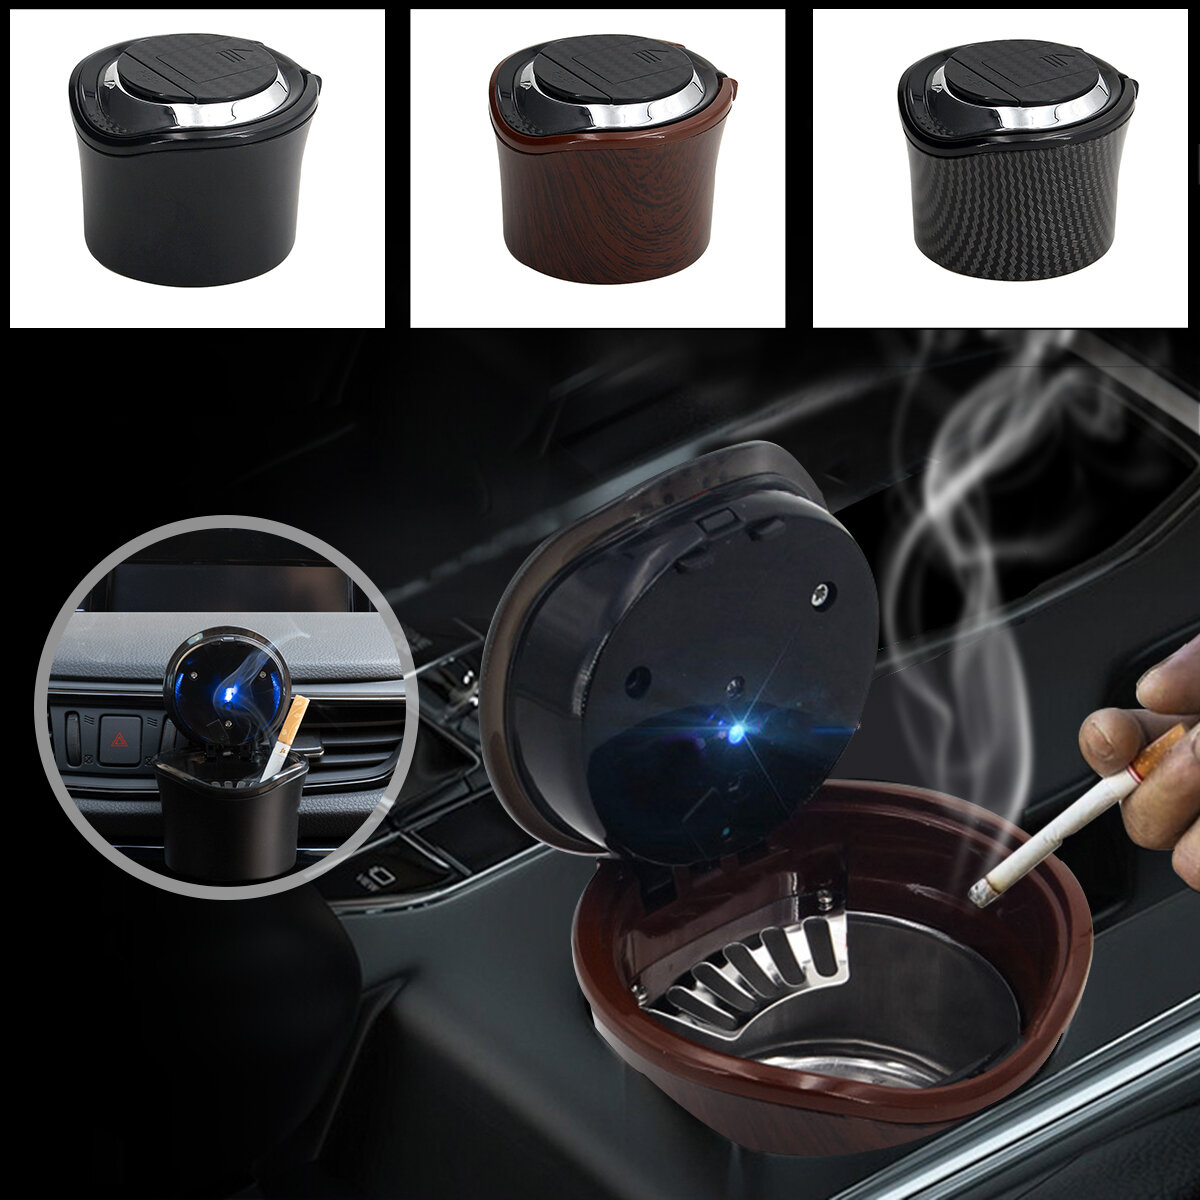 

N15A Portable Car Ashtray With Blue LED Light Automatic Lights Up Smoke Cup Ash Tray